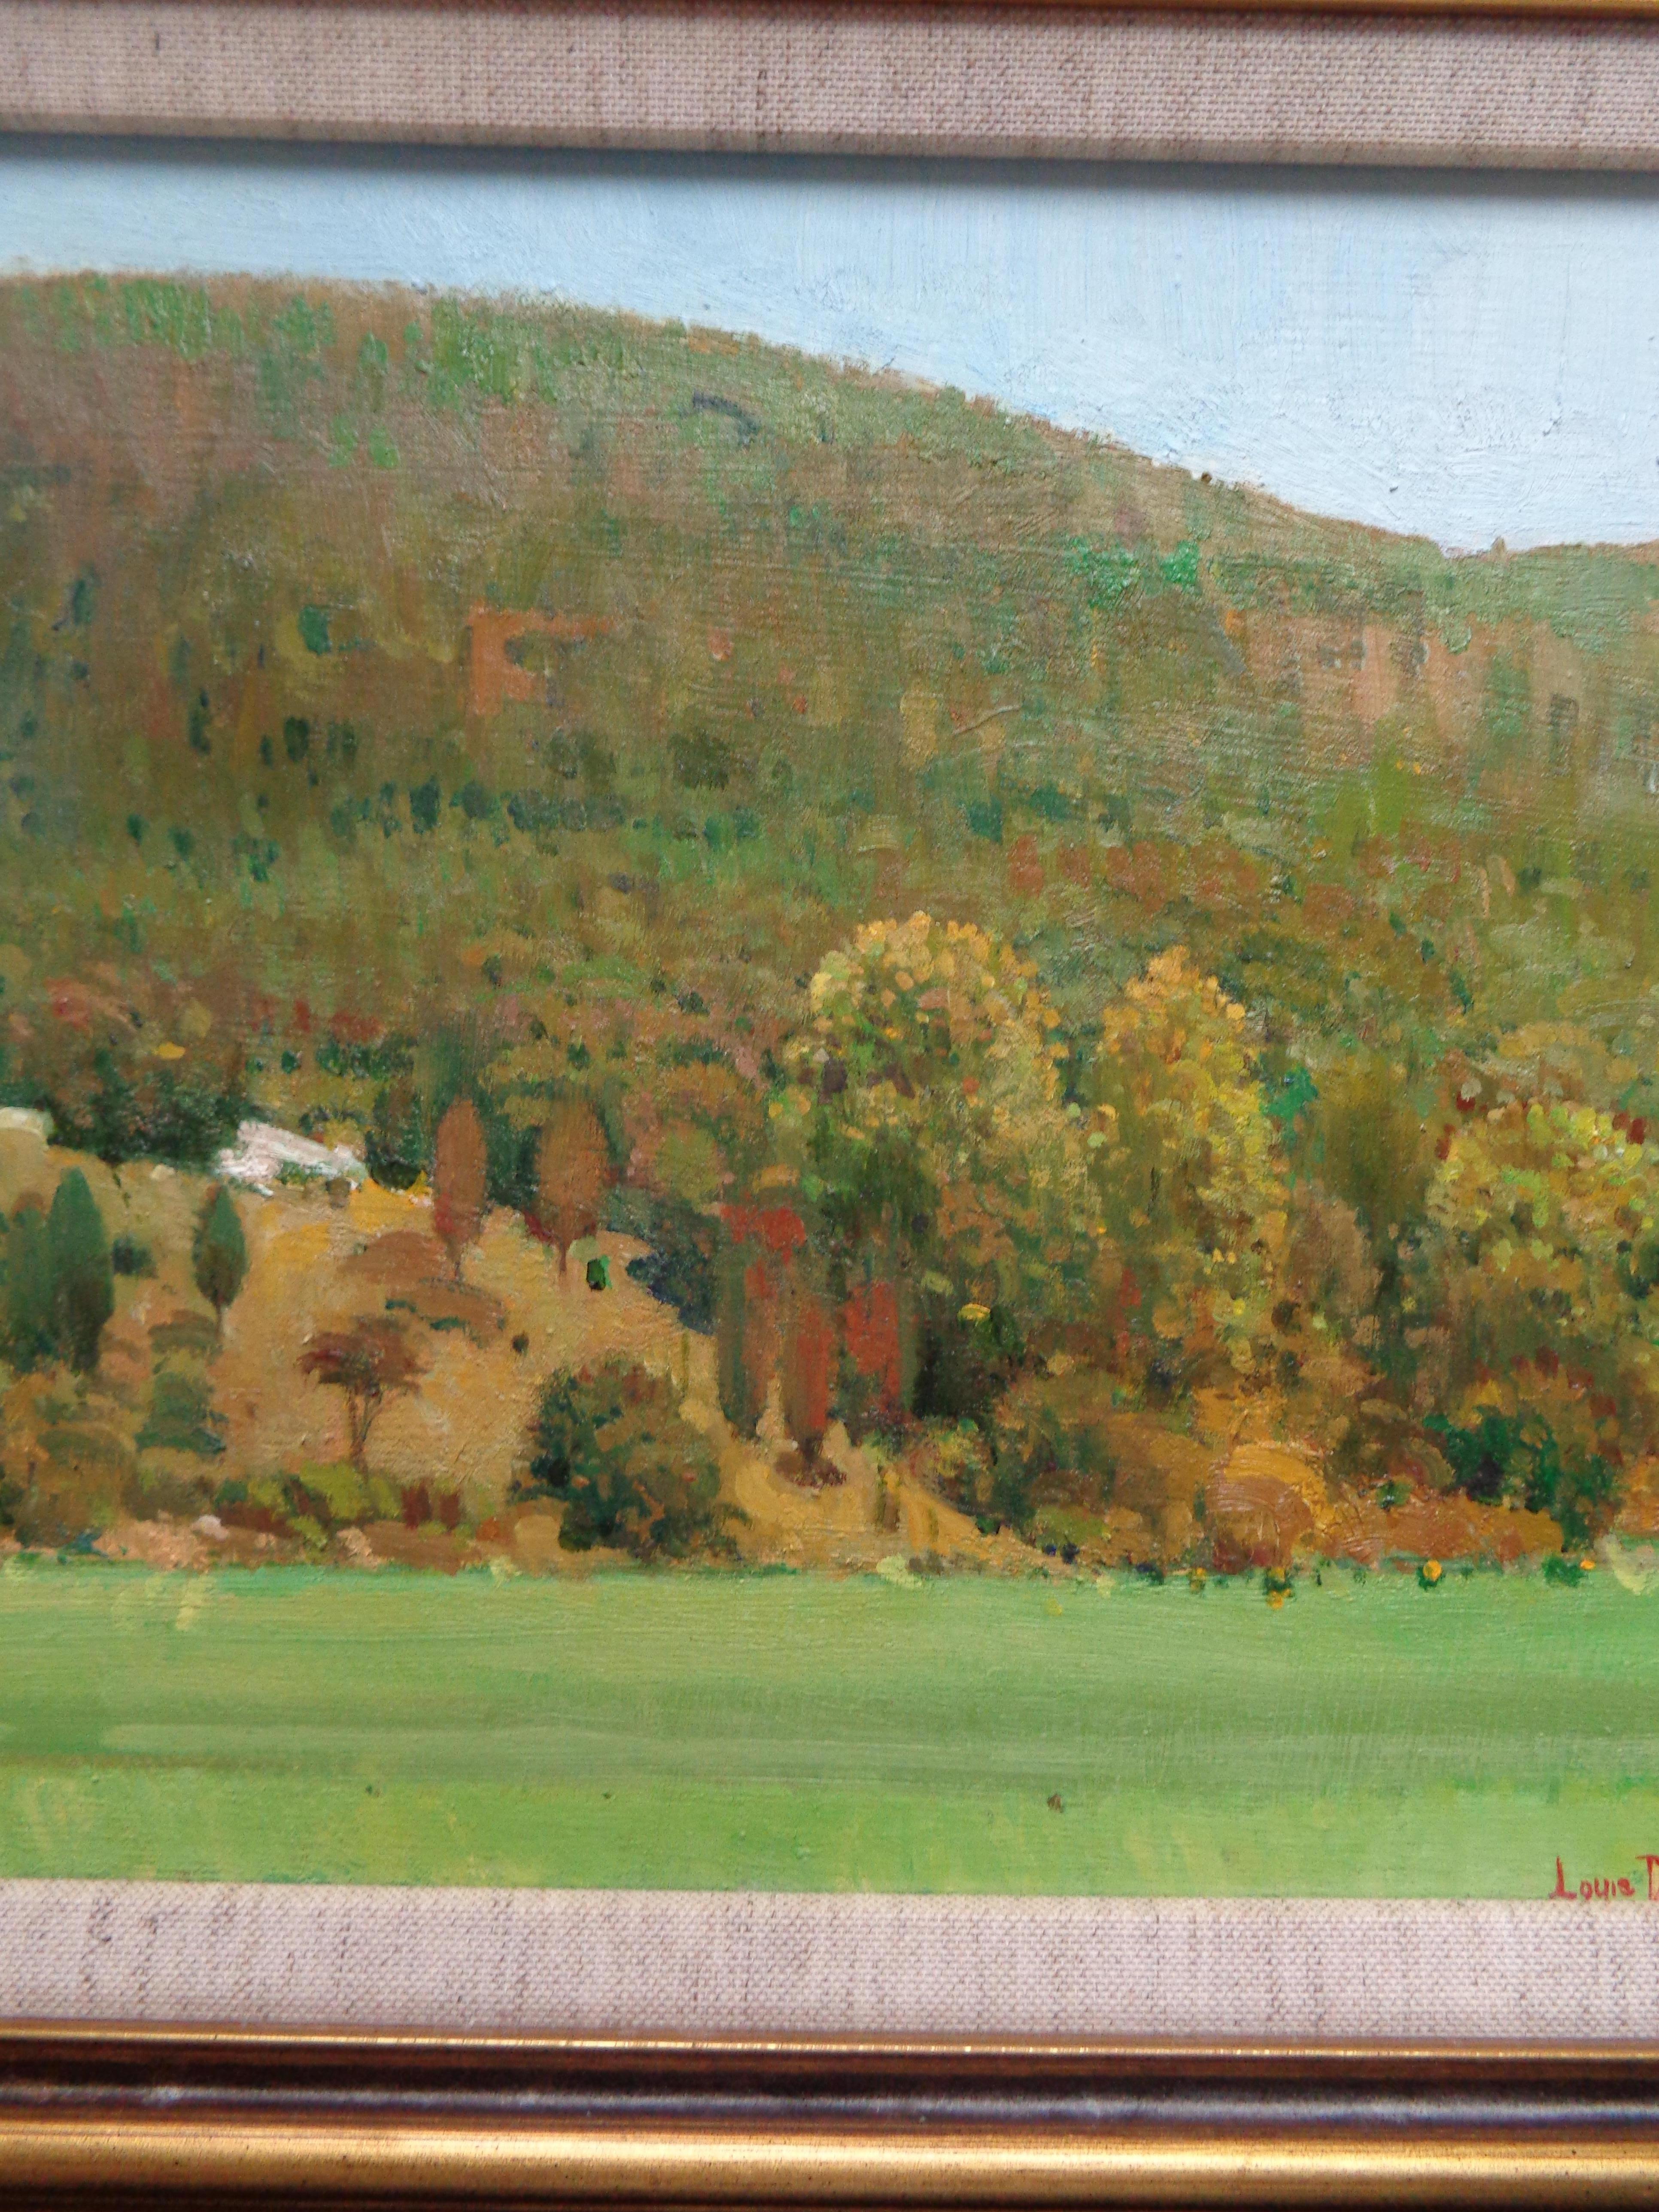 Vermont Hills
oil/panel framed
Salmagundi Club Auction 2003 with auction label
I purchased this painting as is in 2003 at the Salmagundi Club Auction and have owned it since. 

ARTIST'S/DEALERS  STATEMENT
I have been in the art business as an artist